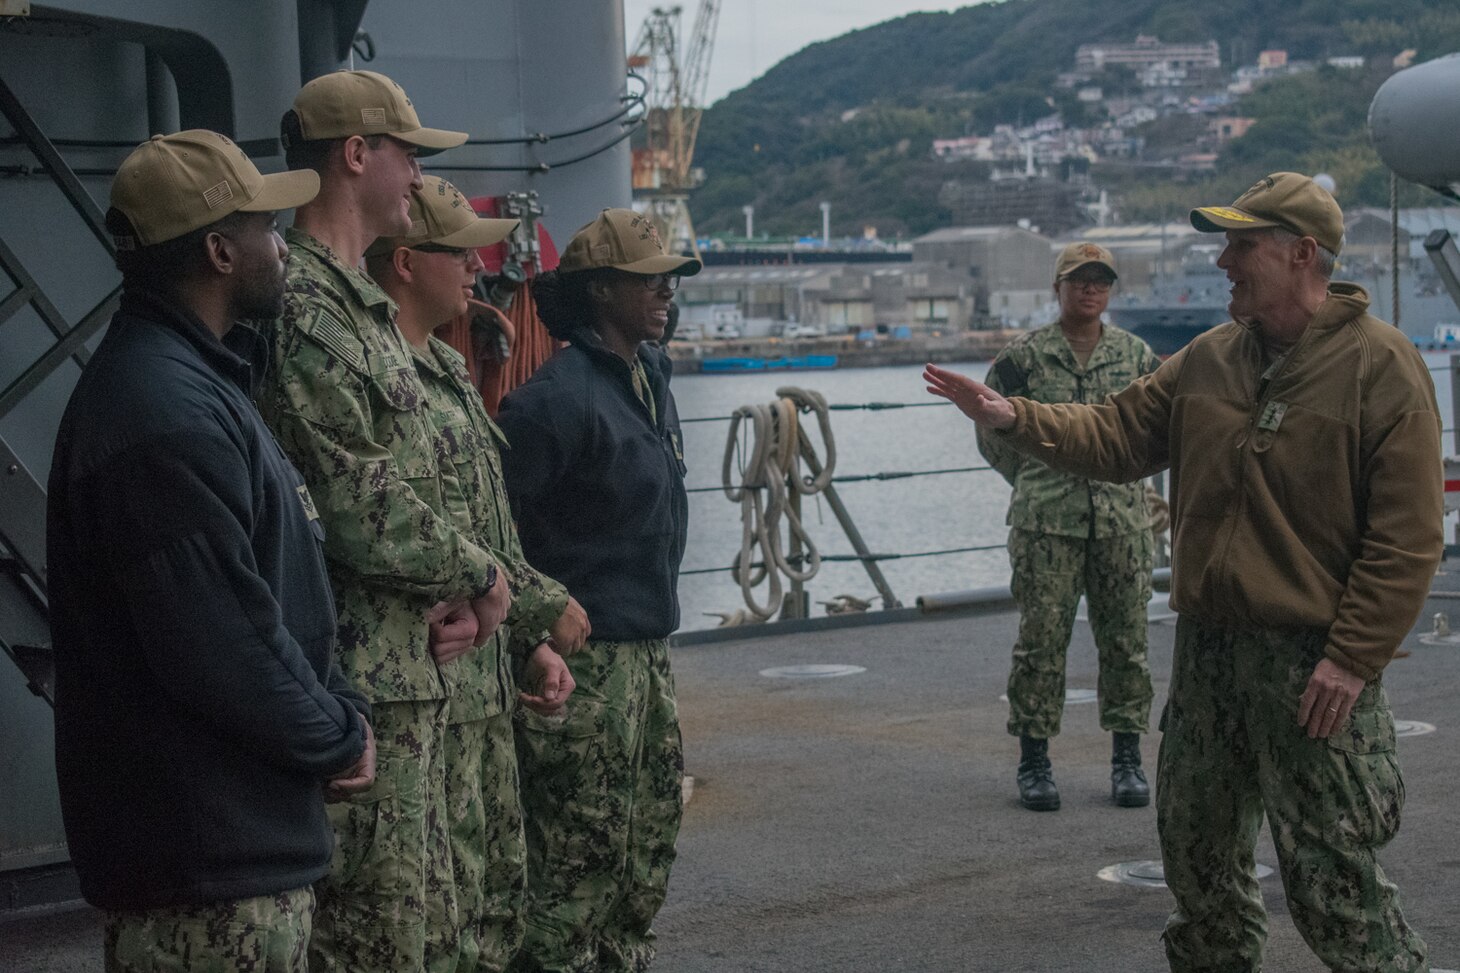 SASEBO, Japan (Jan. 9, 2019) Vice Adm. Phil Sawyer, the U.S. 7th Fleet commander, visits the crew from the amphibious dock landing ship USS Ashland (LSD 48) during a waterfront visit to forward deployed naval forces operating out of Fleet Activities Sasebo, Japan.